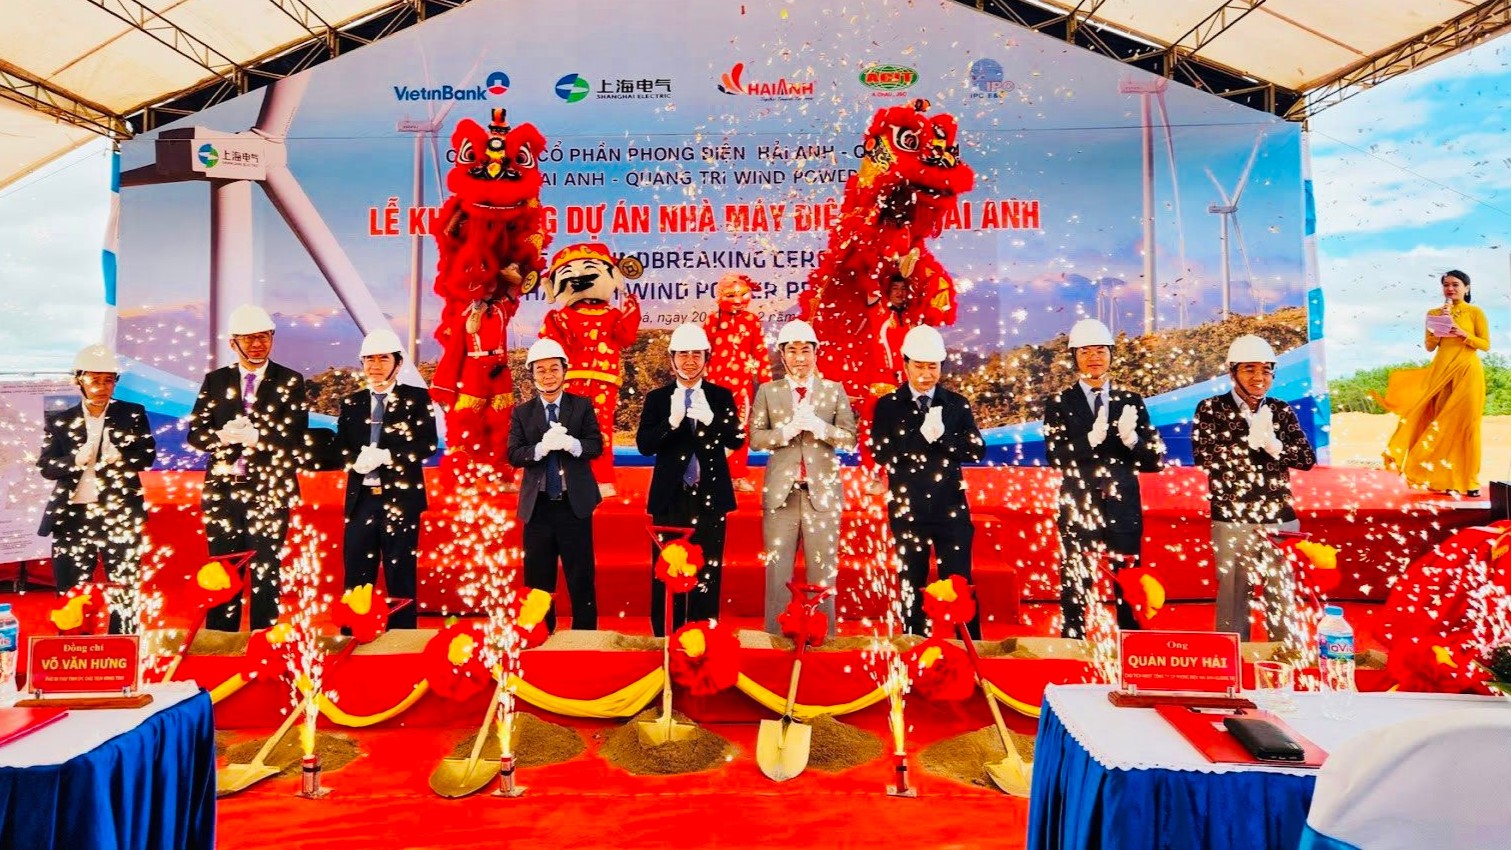 The Hai Anh Wind Power project in Quang Tri province, central Vietnam, breaks ground on December 20, 2023. Photo courtesy of Quang Tri TV.